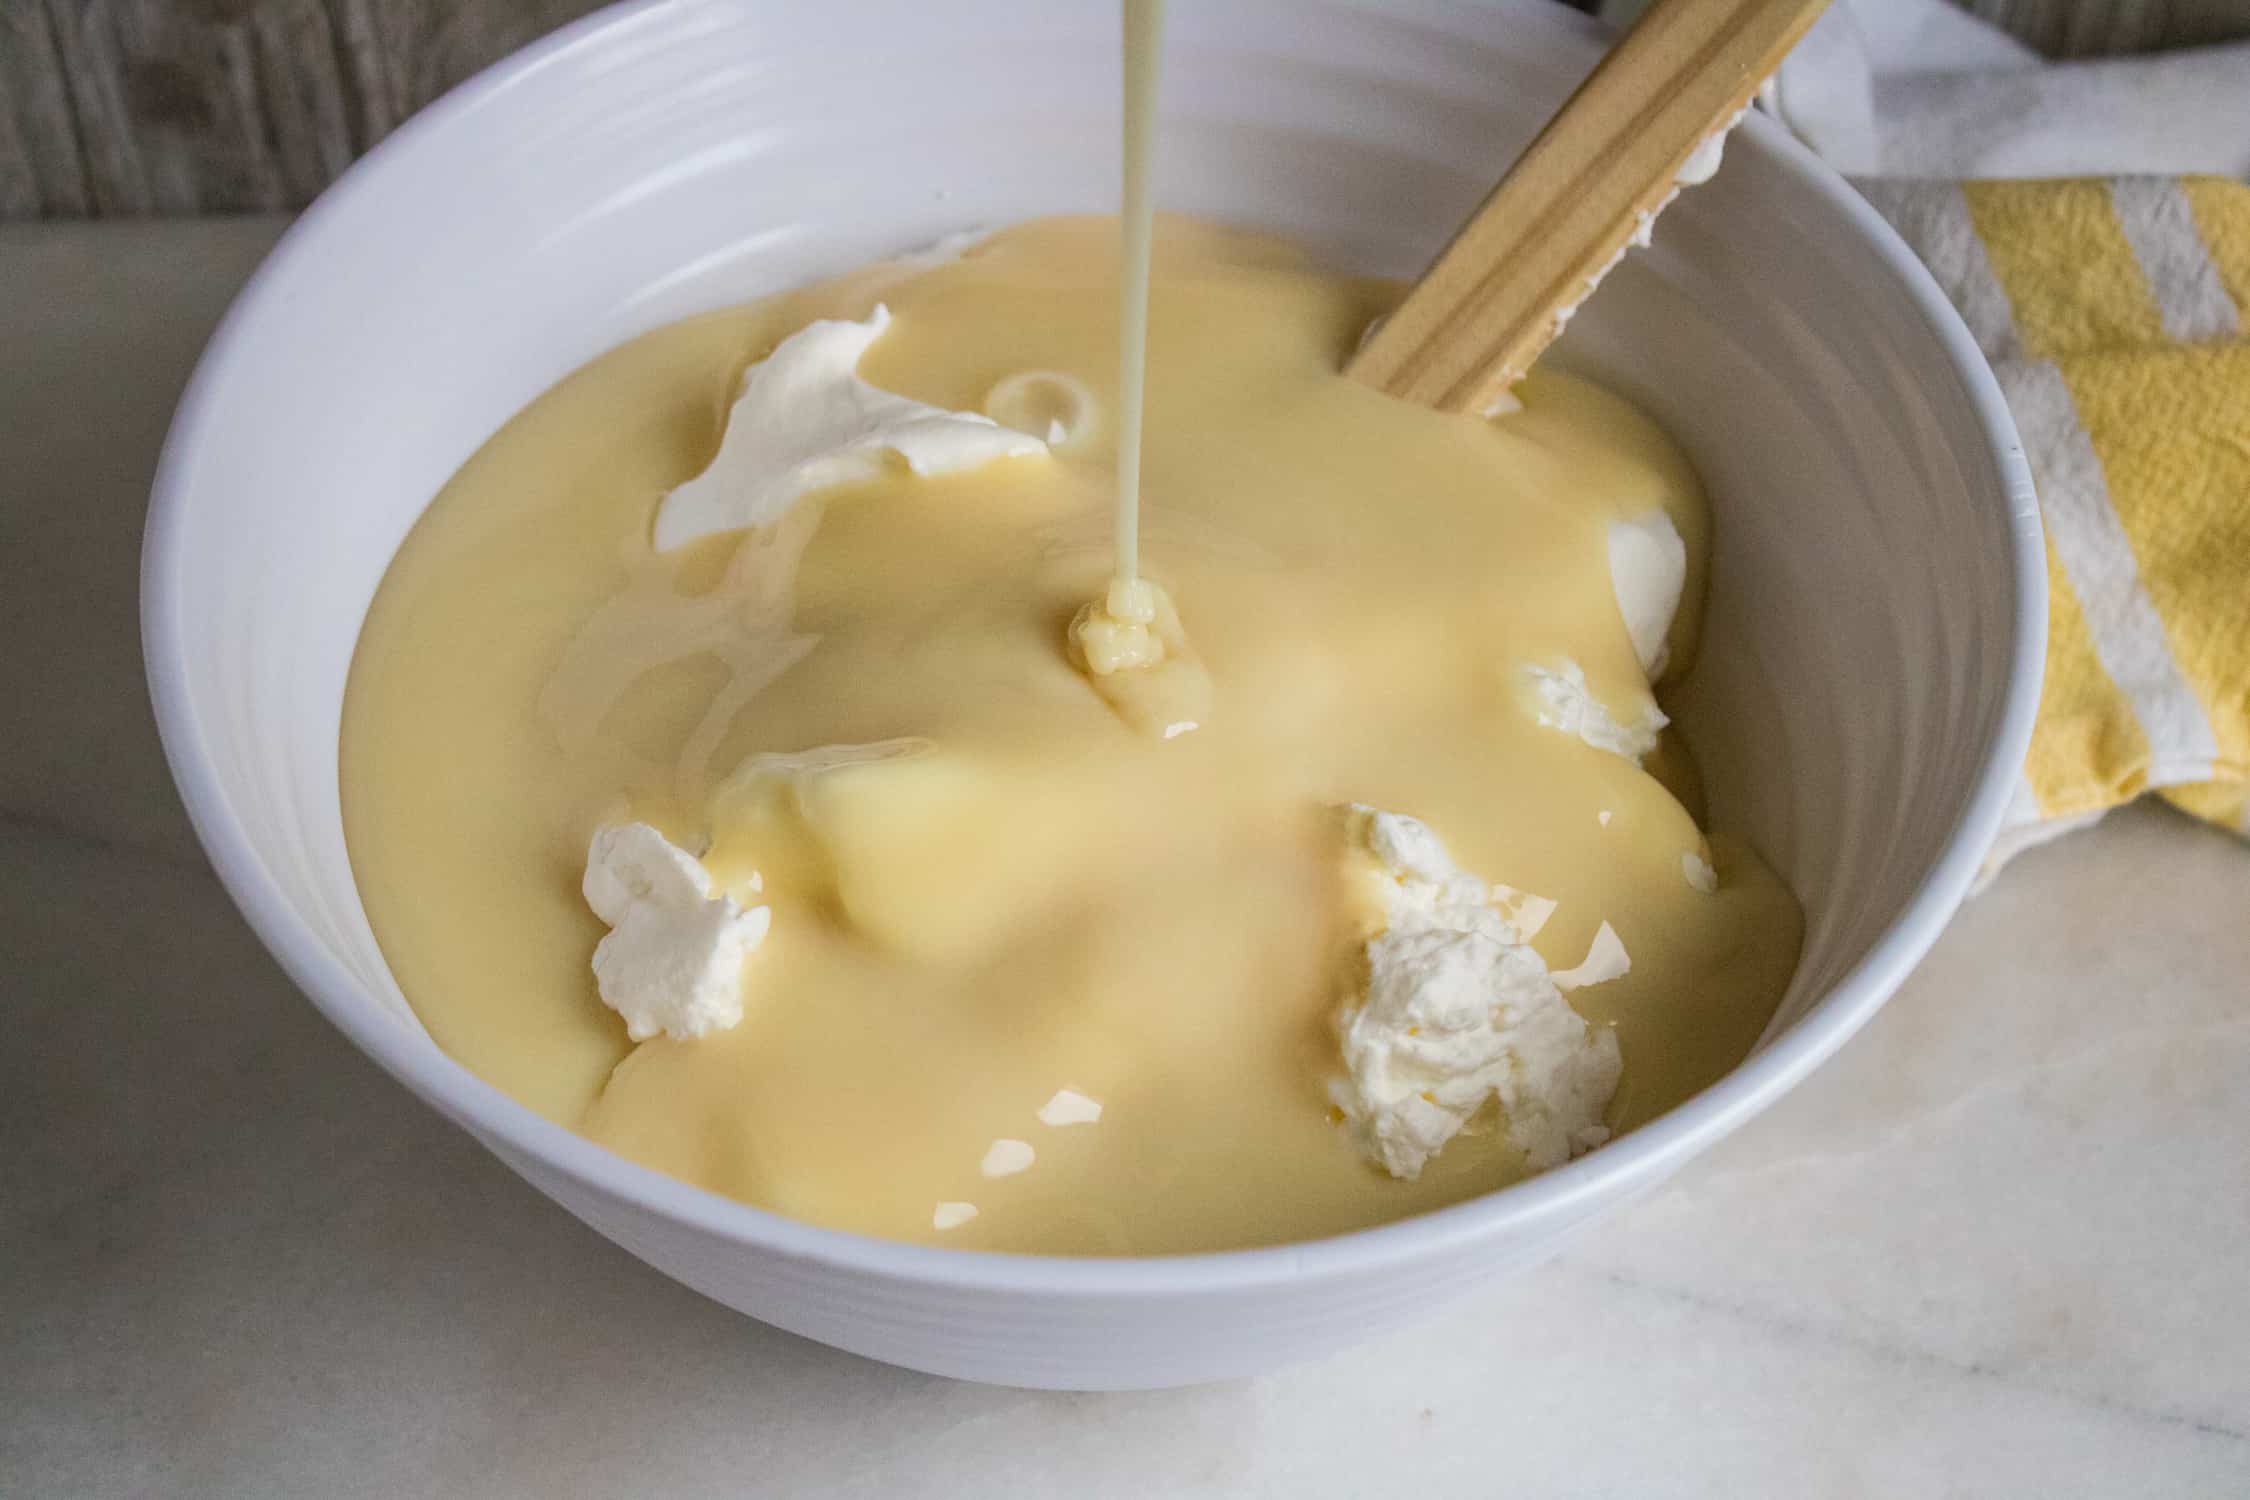 sweetened condensed milk being poured into a bowl of thick, heavy whipping cream